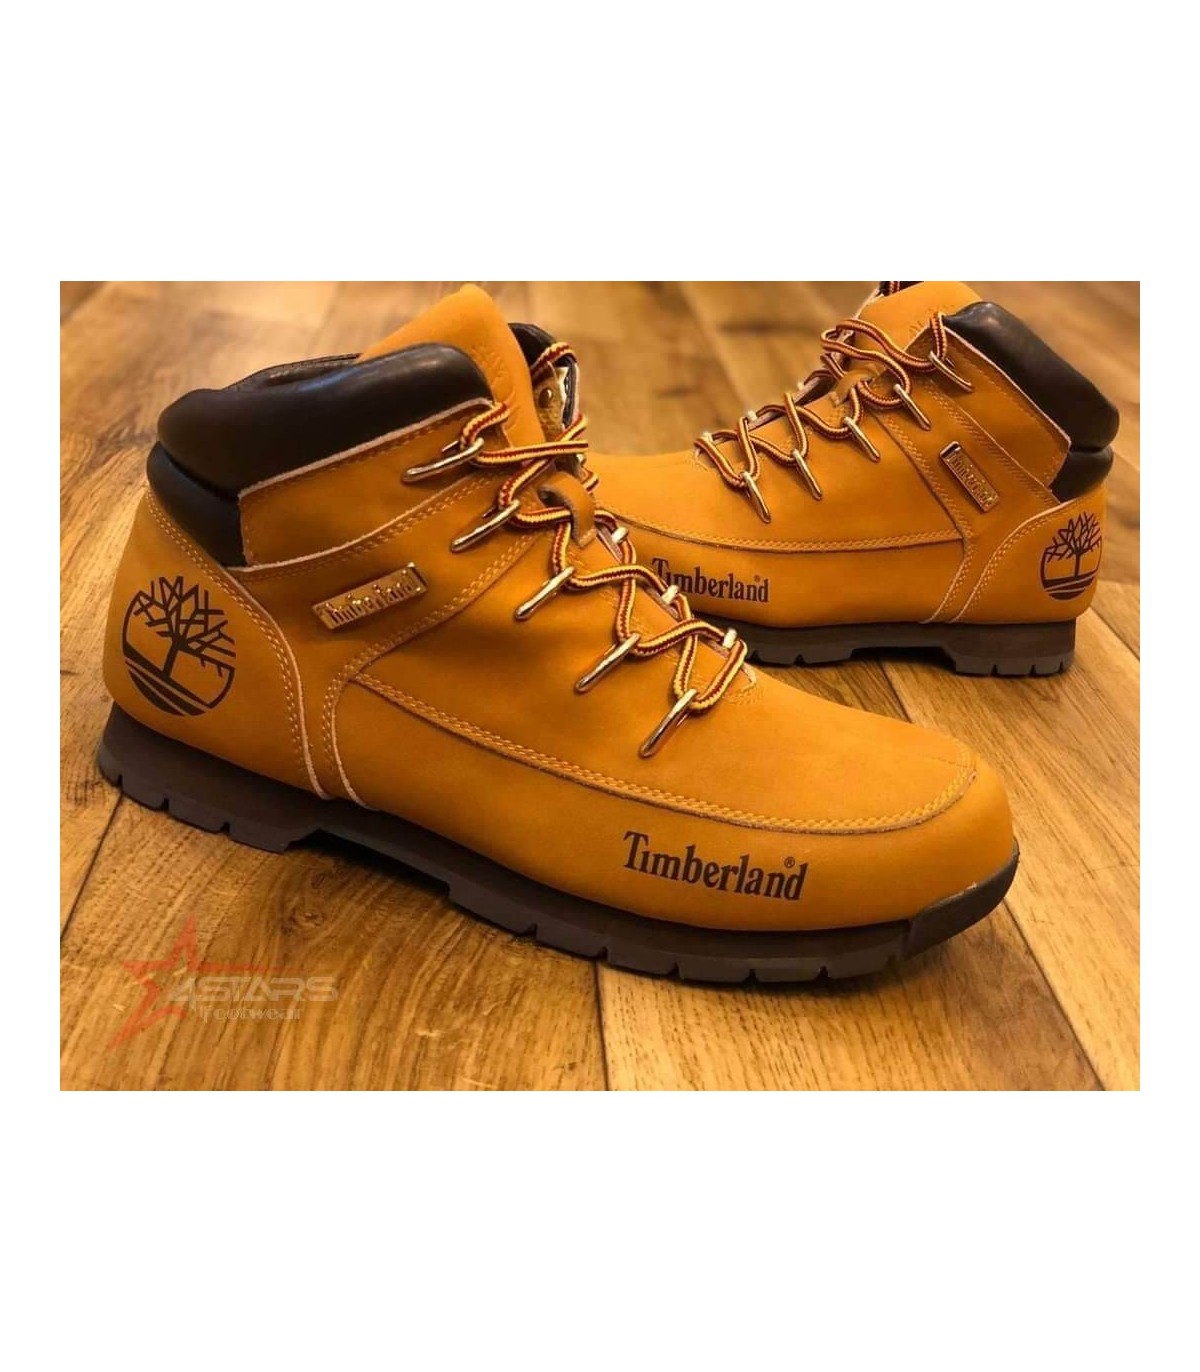 Timberland Sporty Boots - Brown/Black